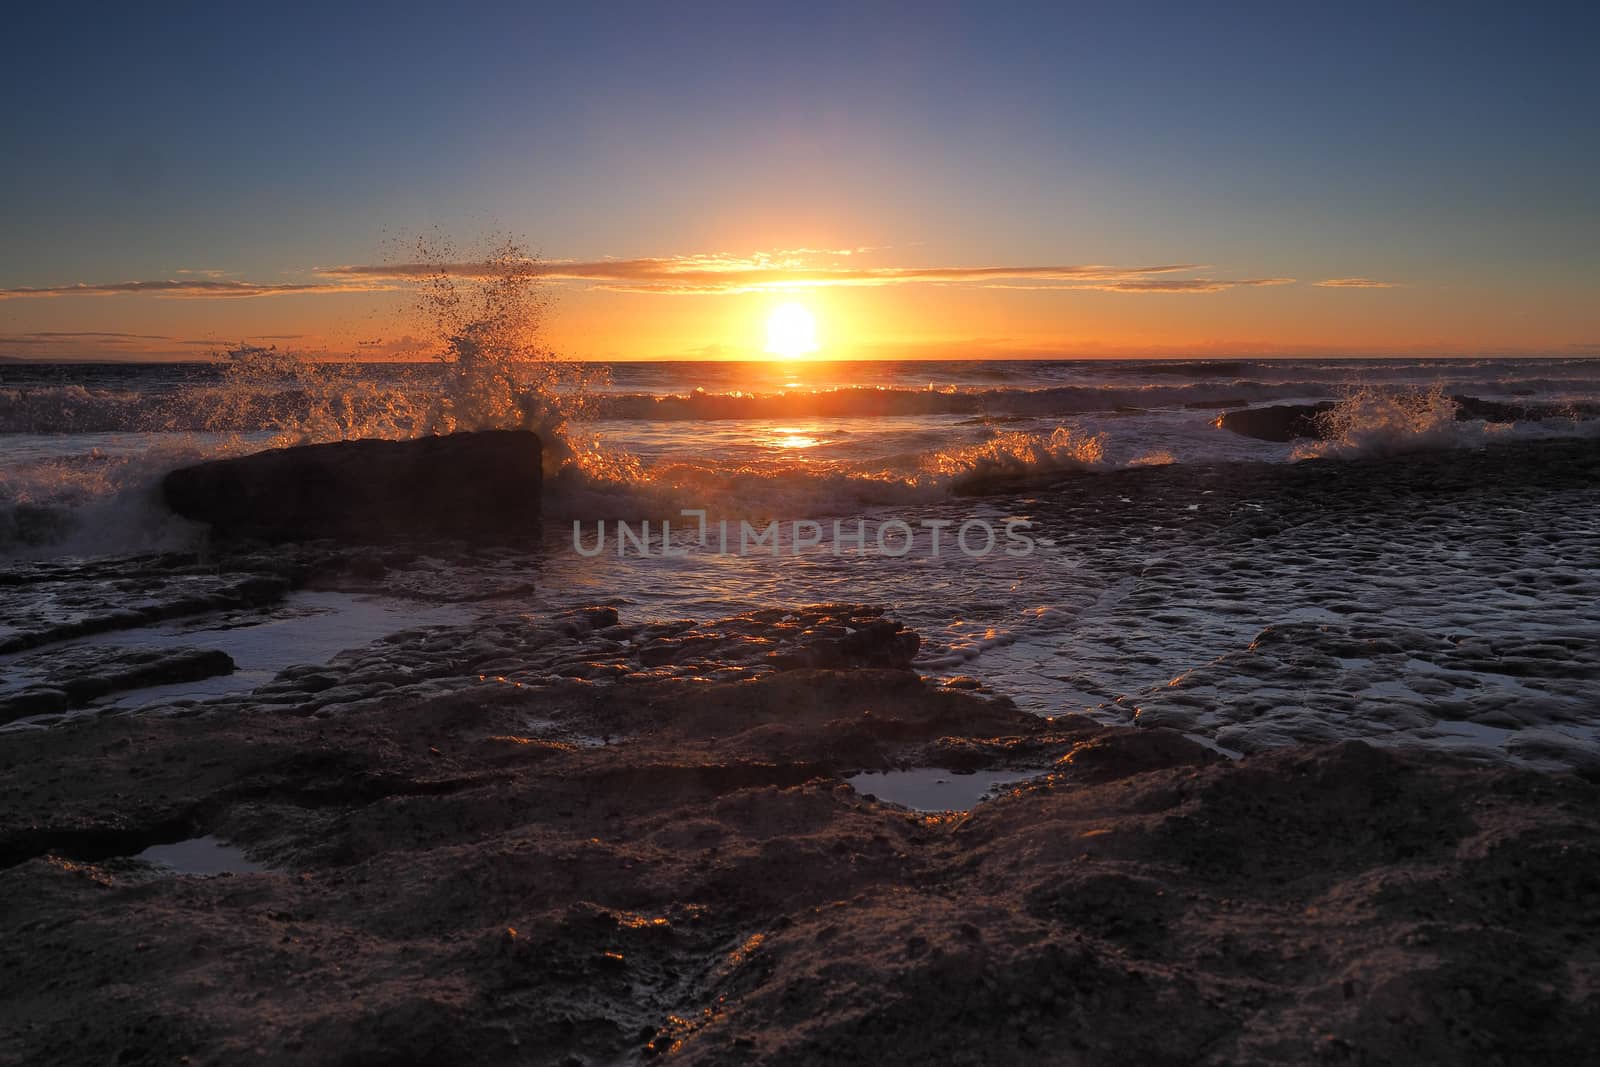 Sunset with clouds and waves crashing onto rocks, Dunraven Bay, South Wales by PhilHarland